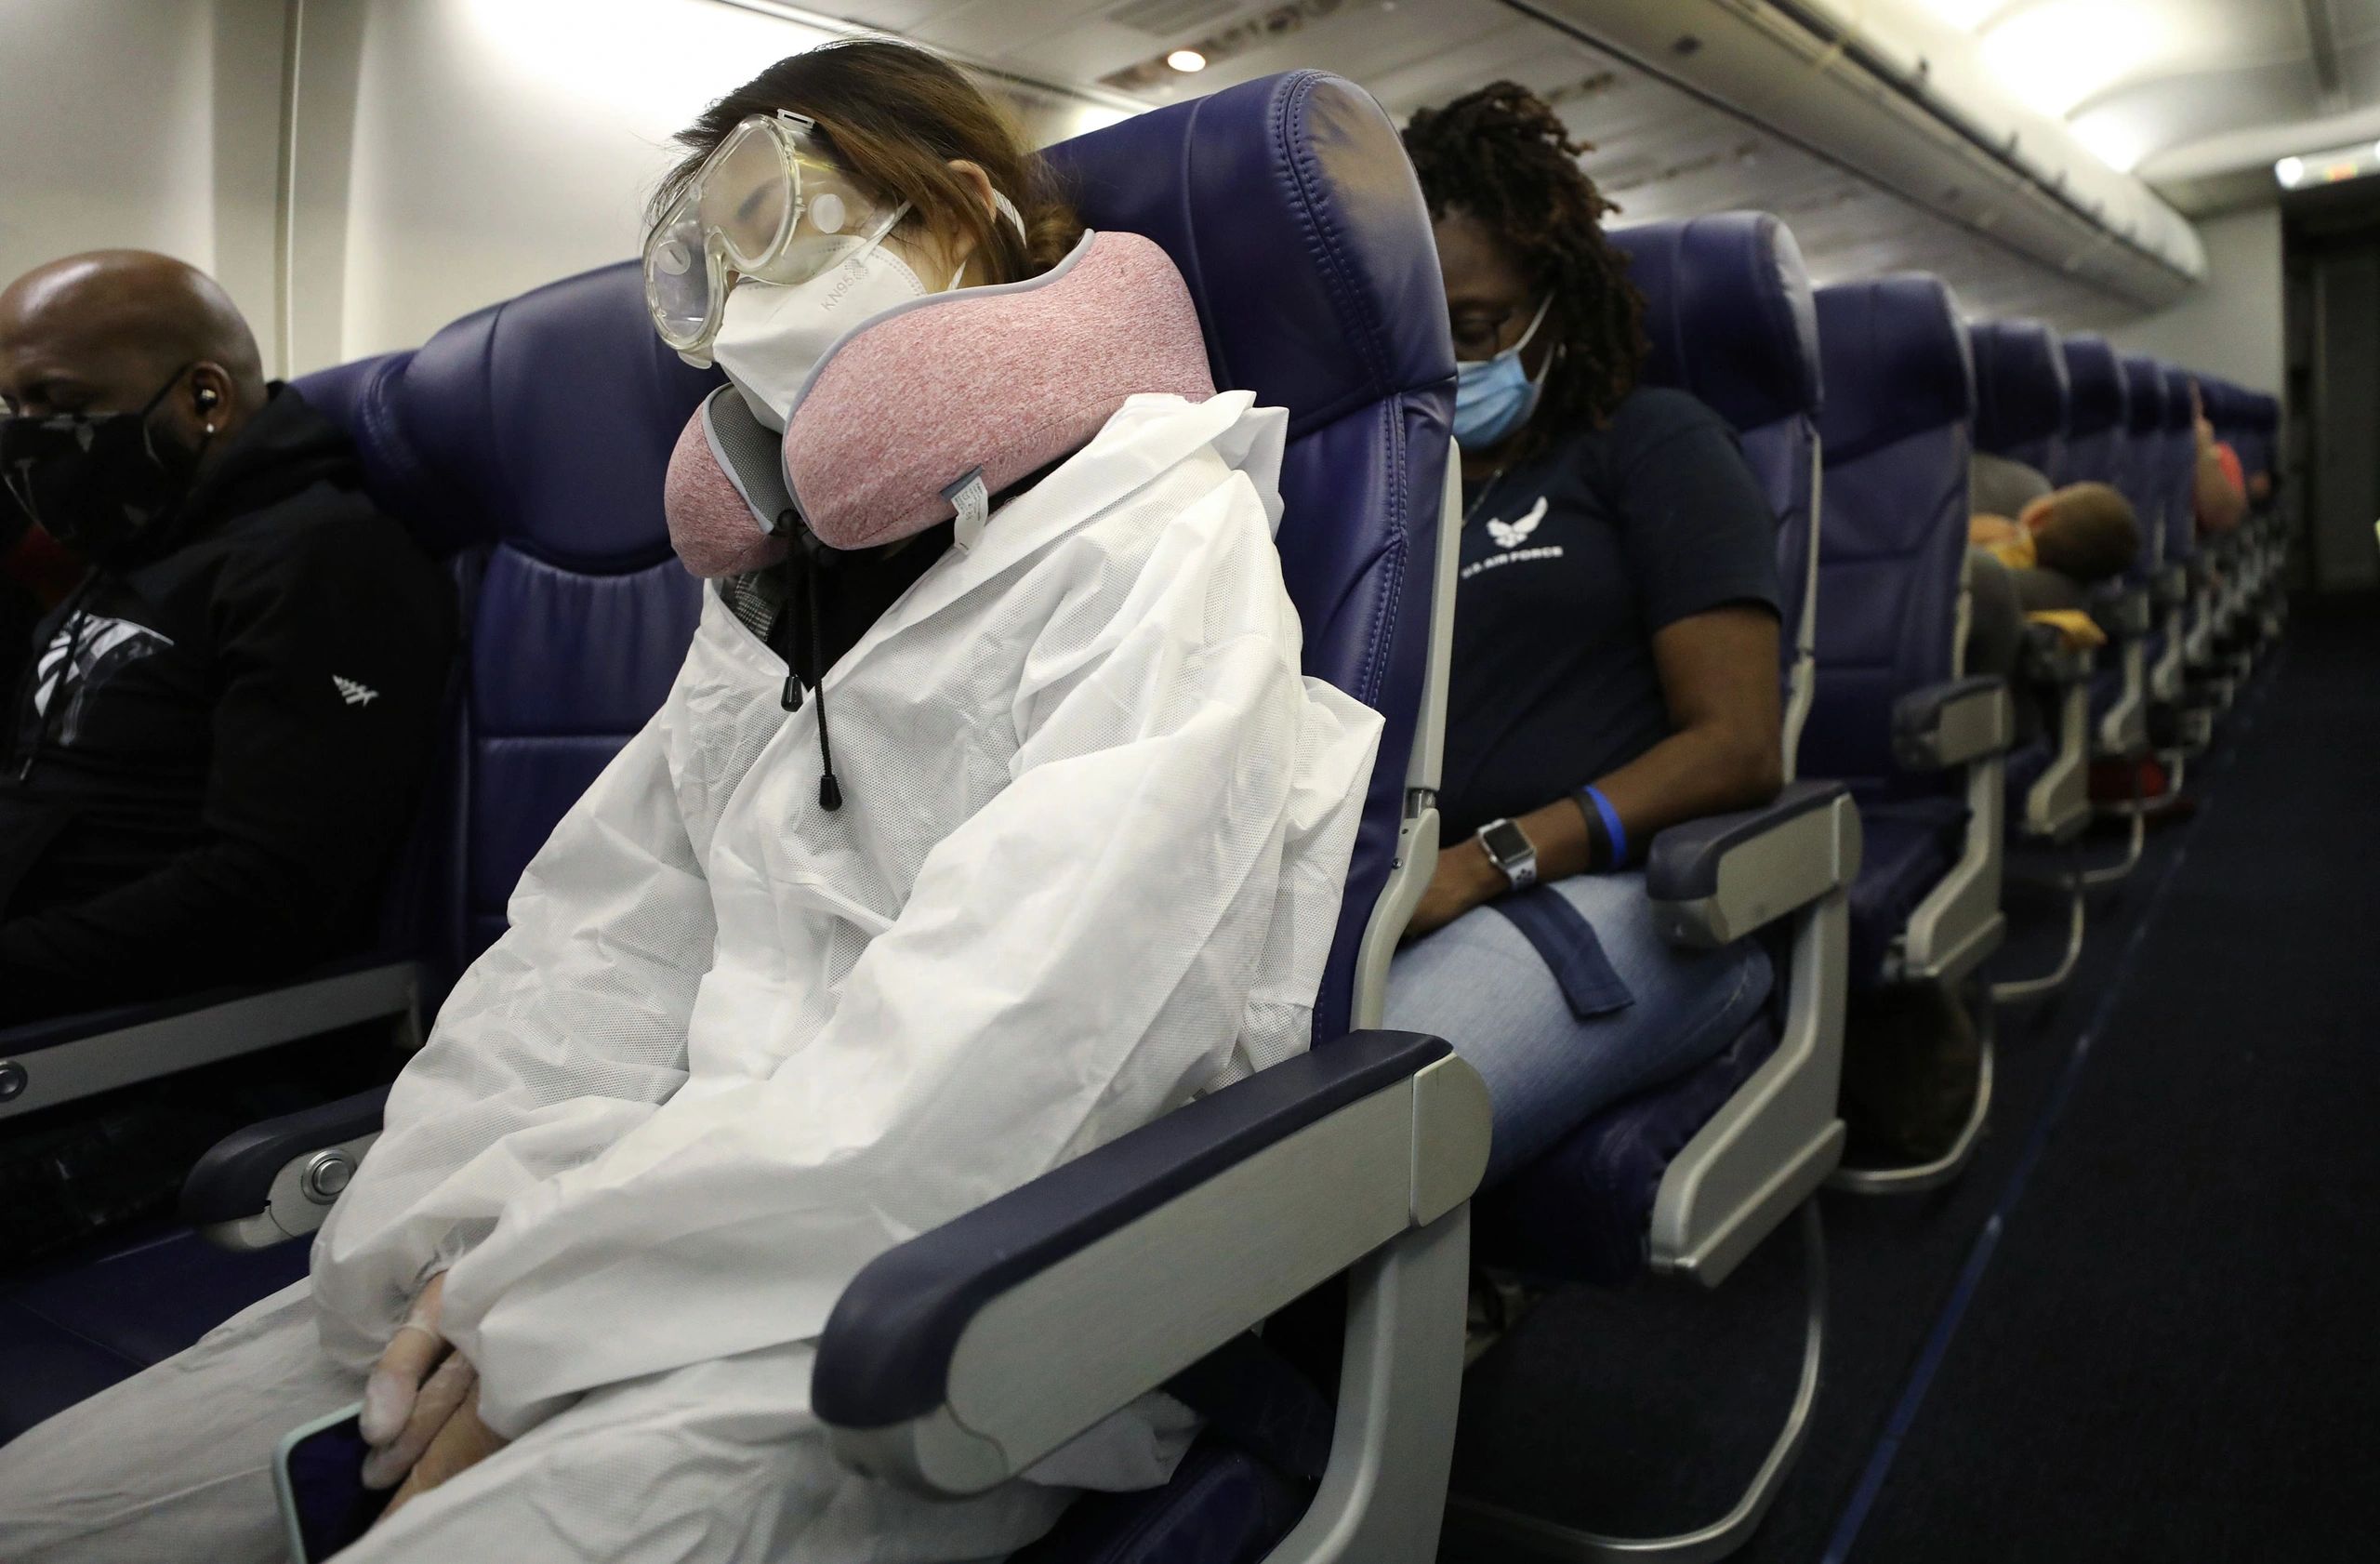 FAA, "we expect passengers to wear masks when directed."